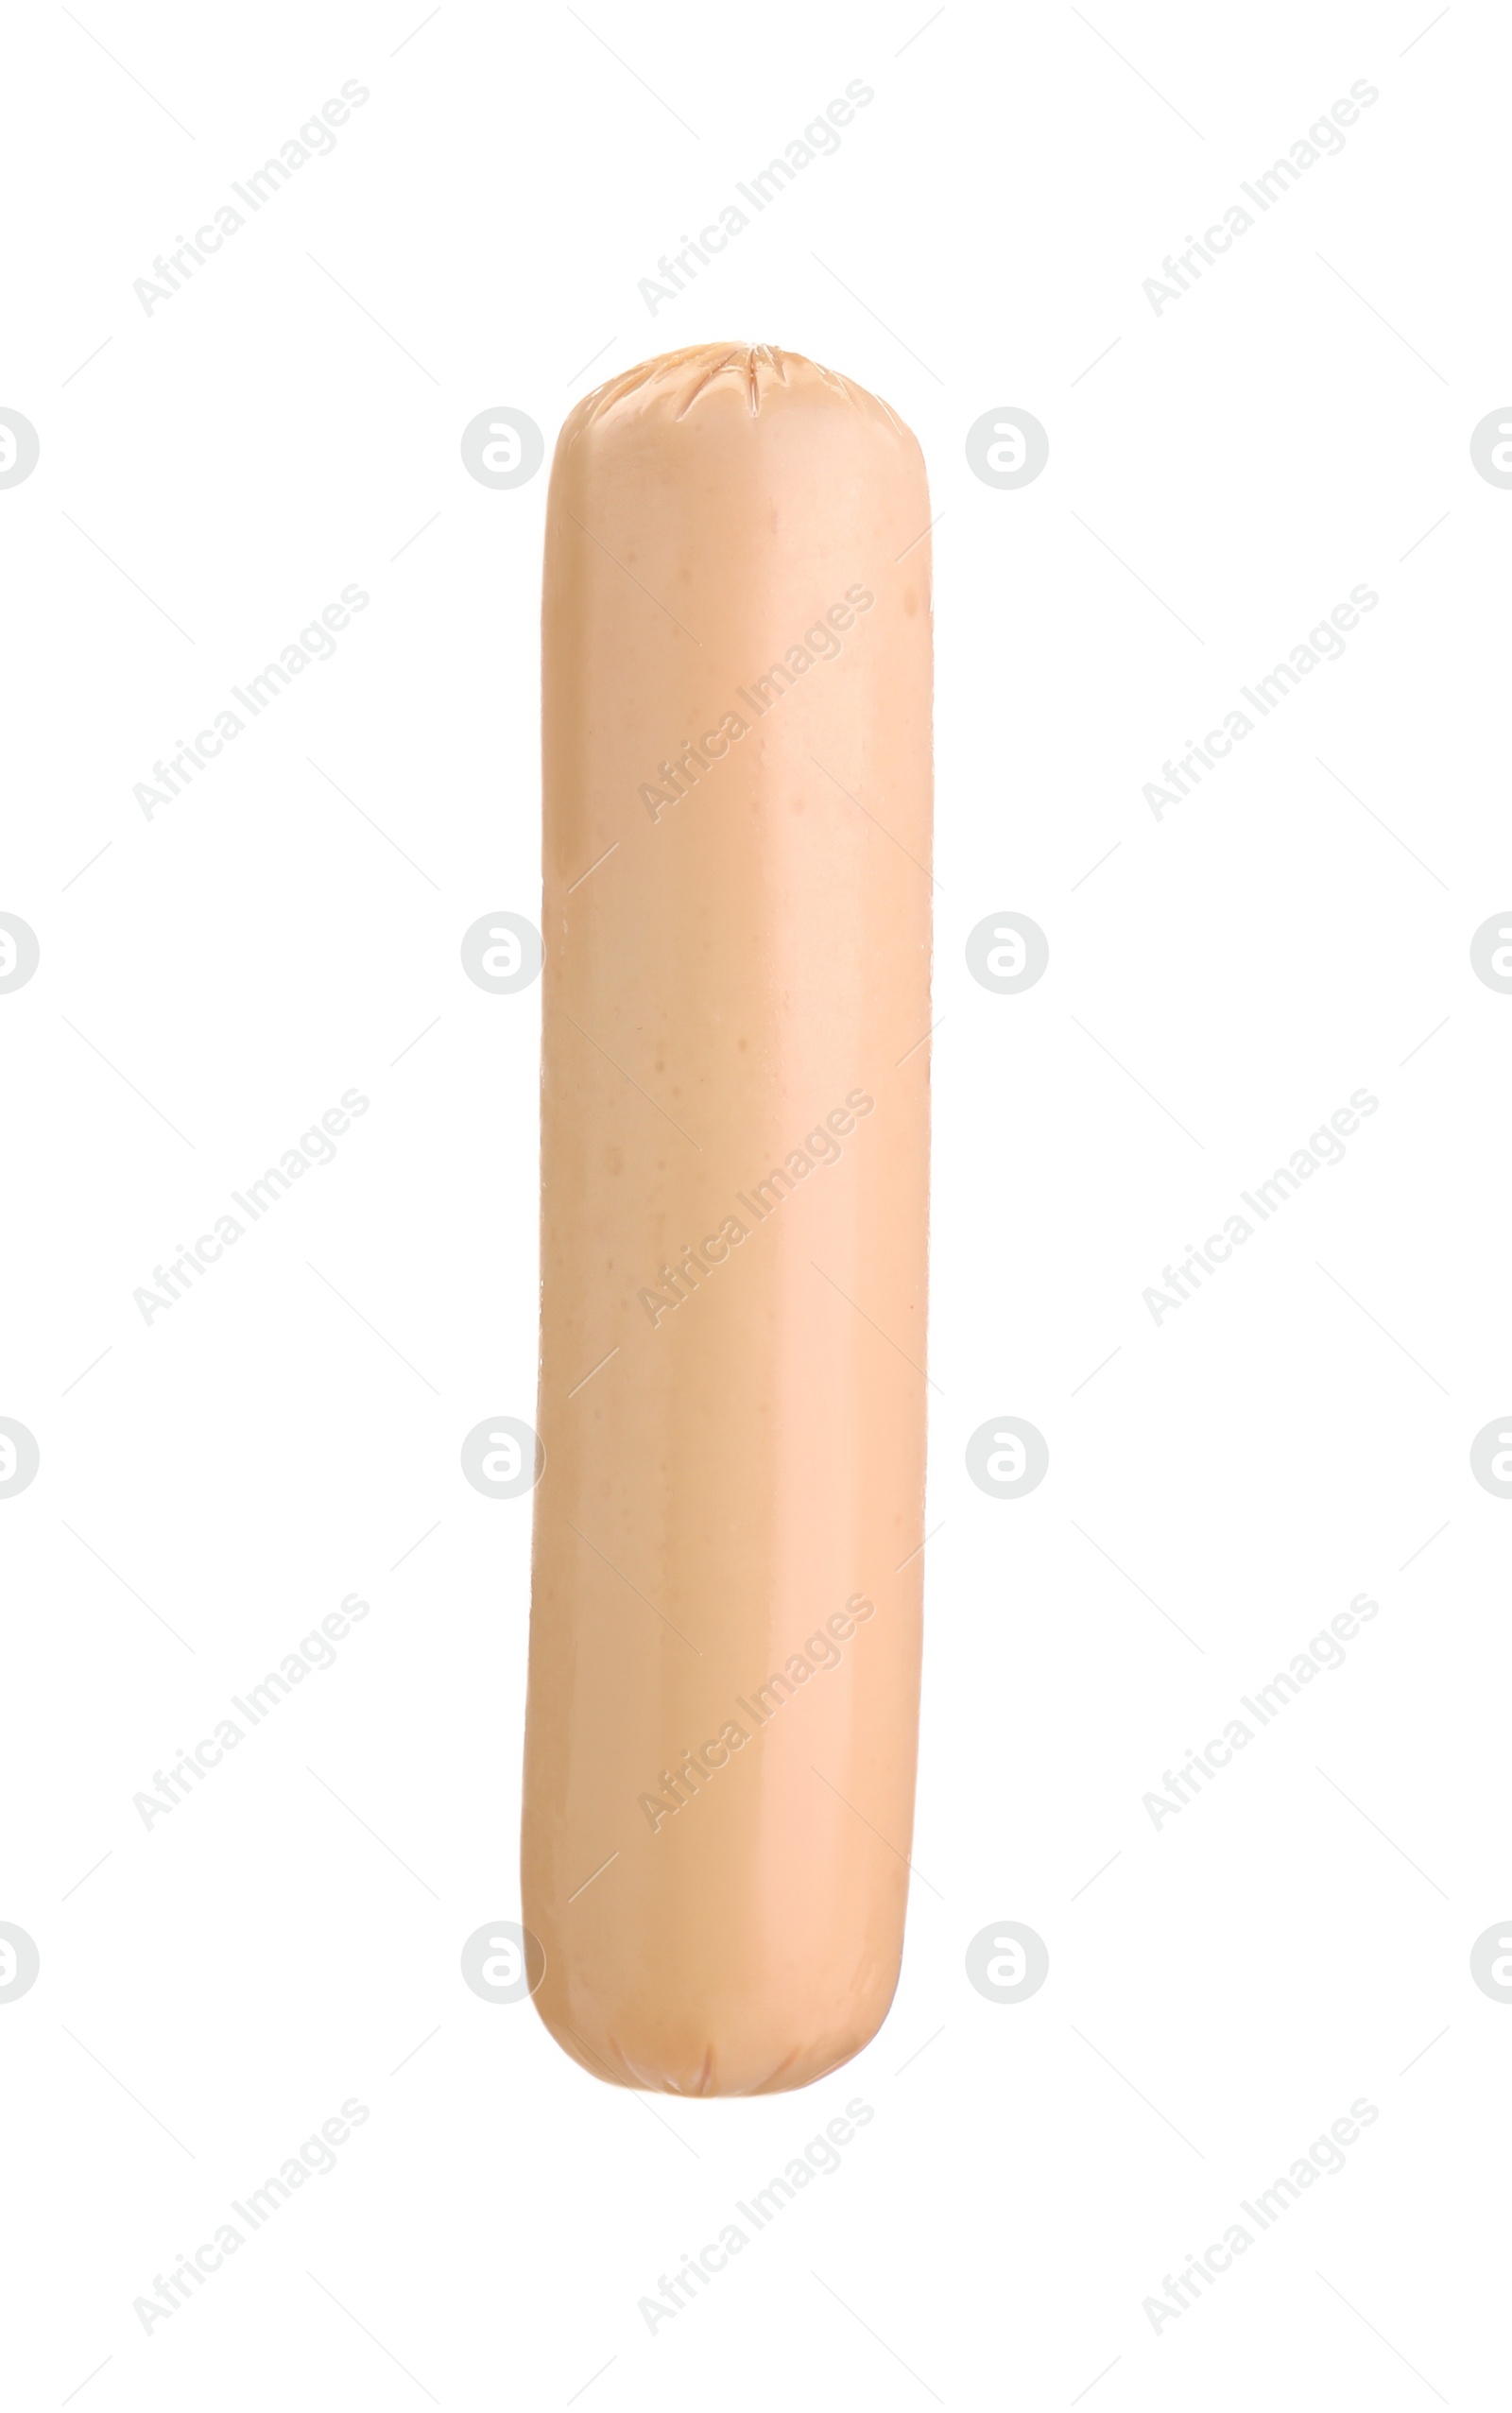 Photo of One fresh raw sausage isolated on white. Meat product